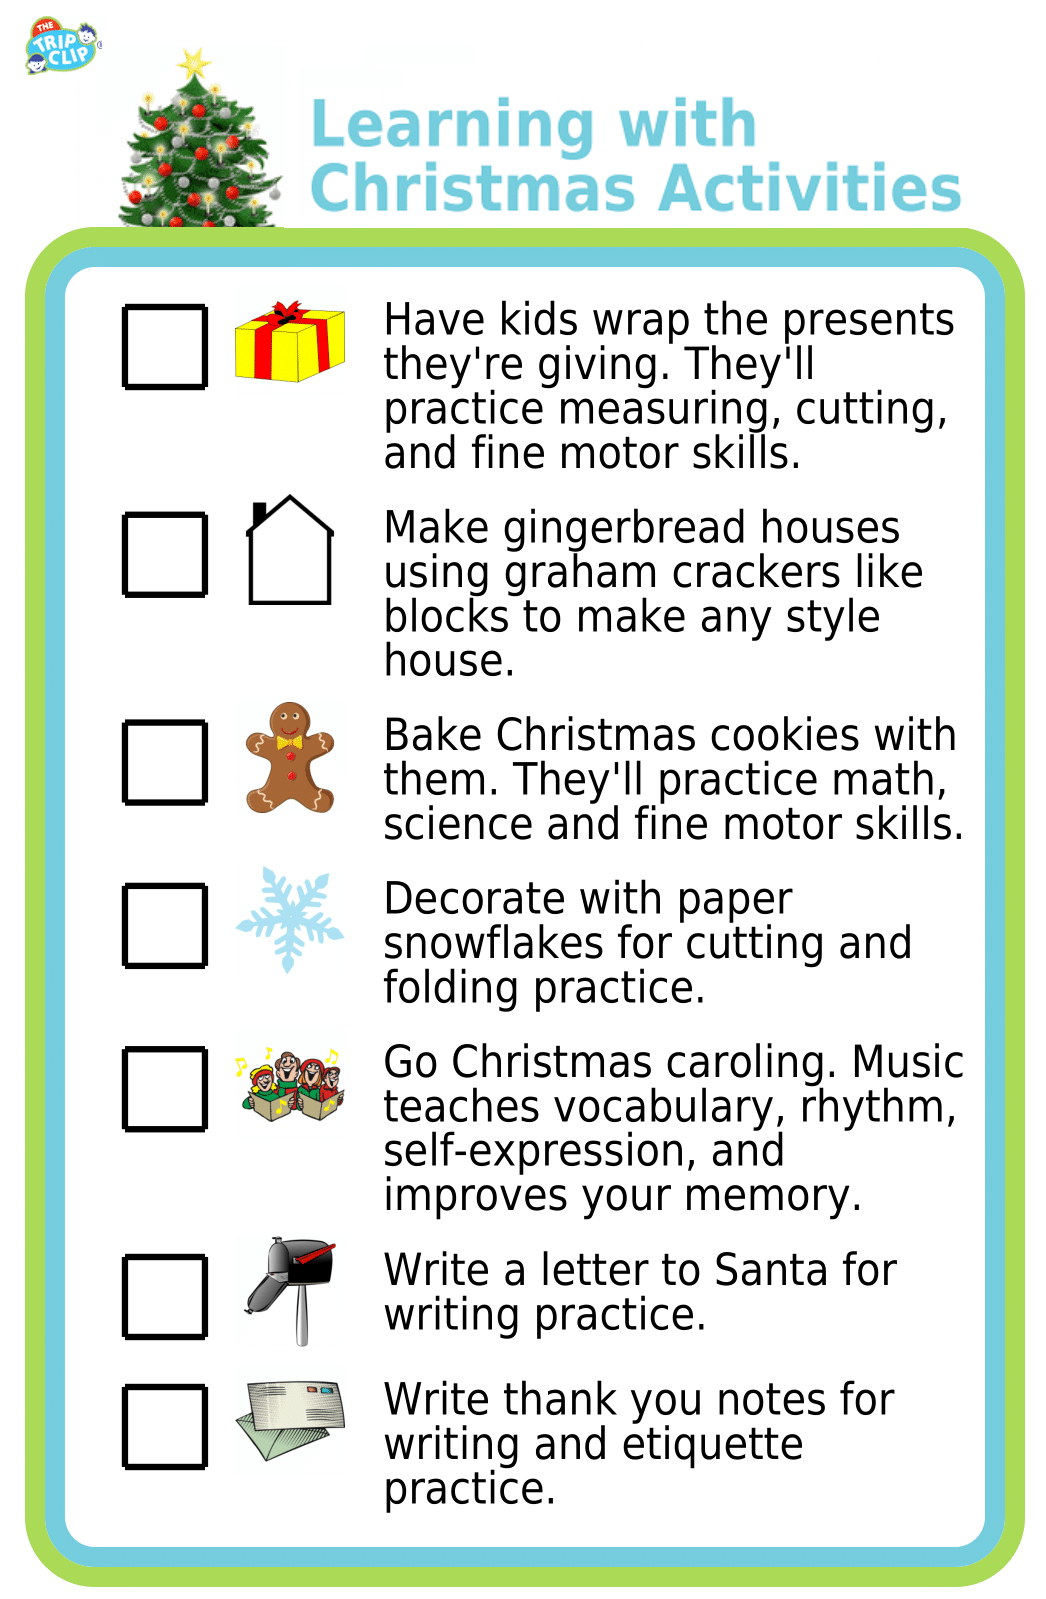 Picture checklist showing ways kids can learn from the holidays